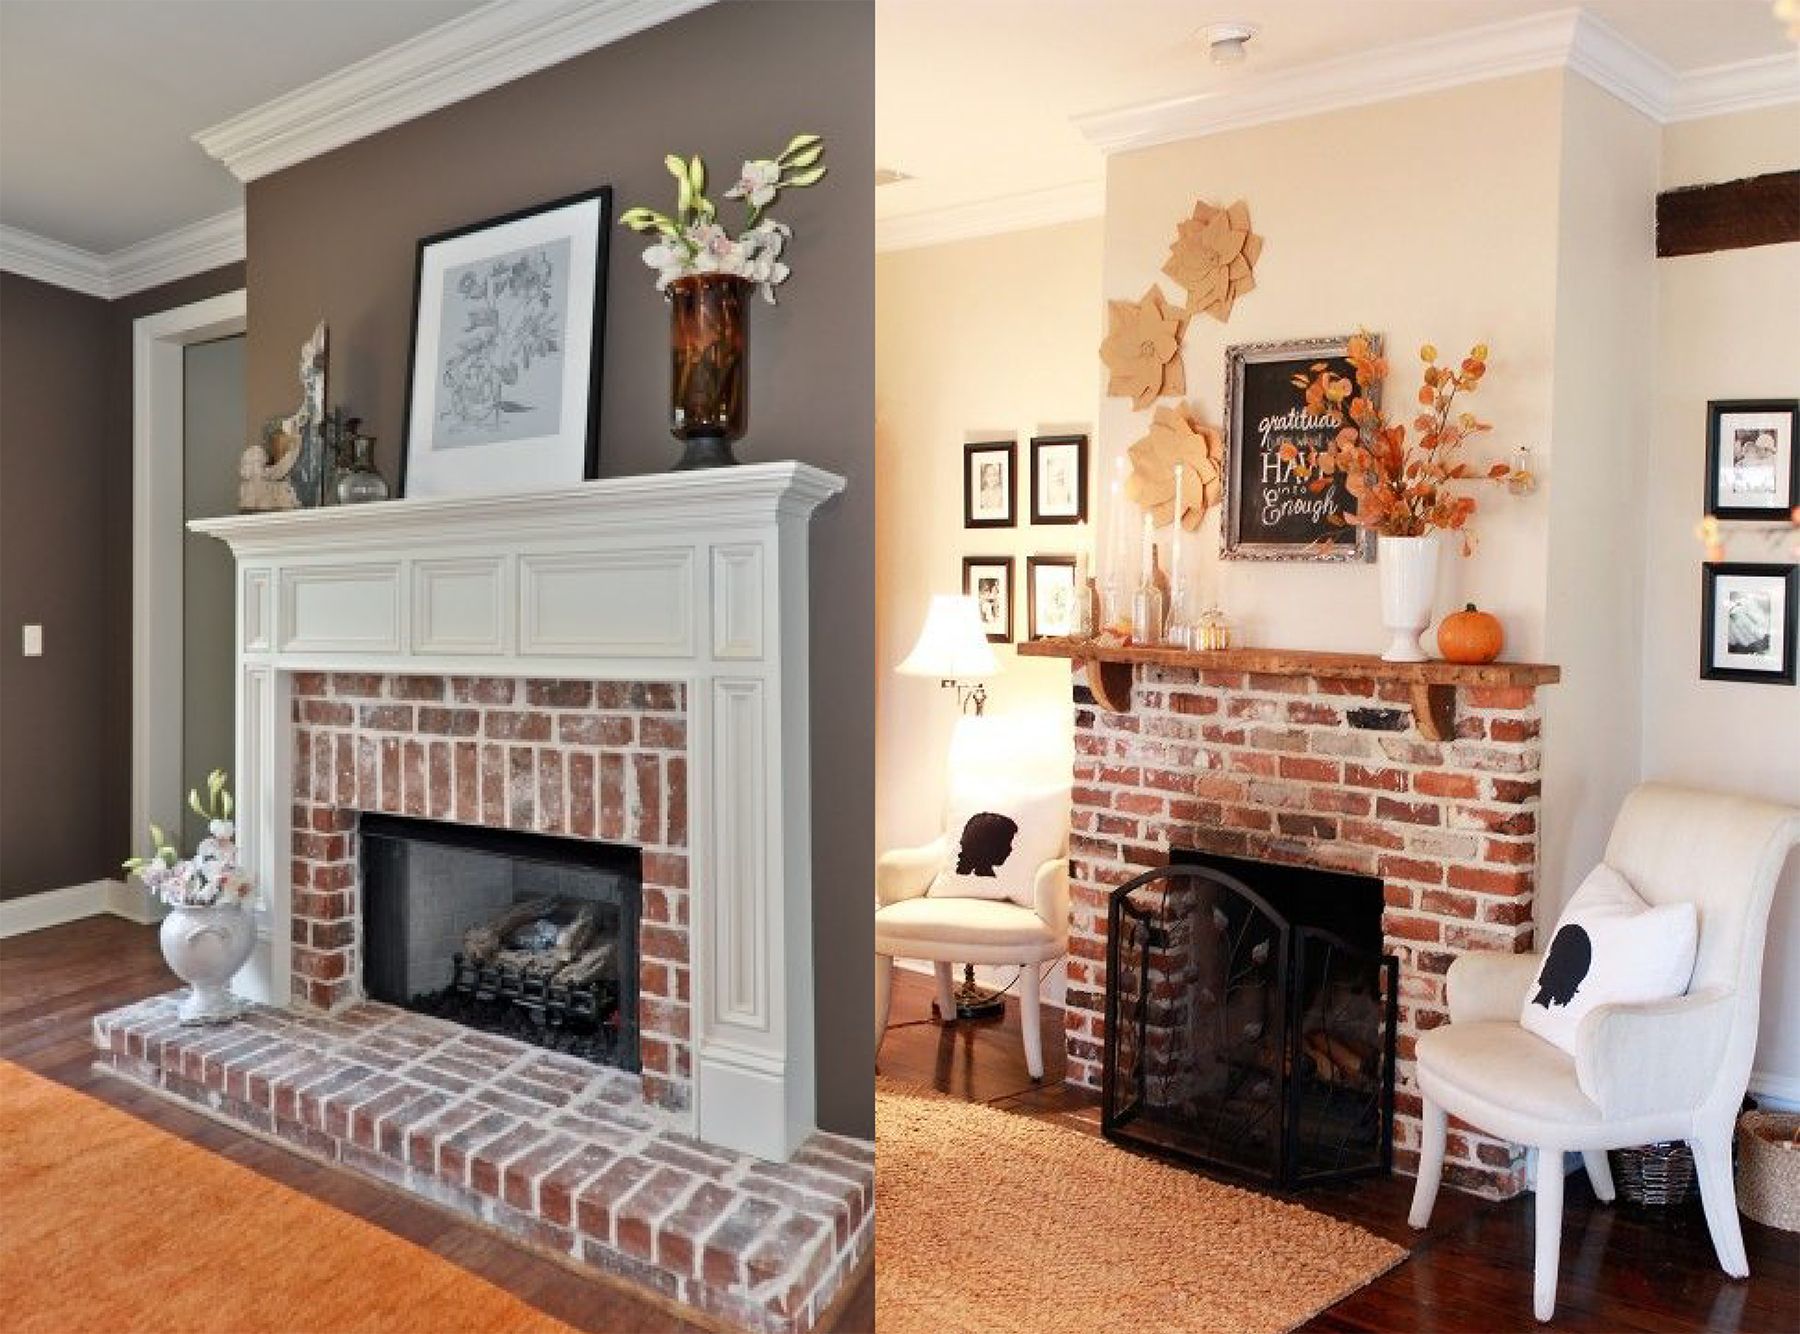 Hearthstone Fireplace Insert Lovely Exposed Brick Fireplace Almond Home In 2019